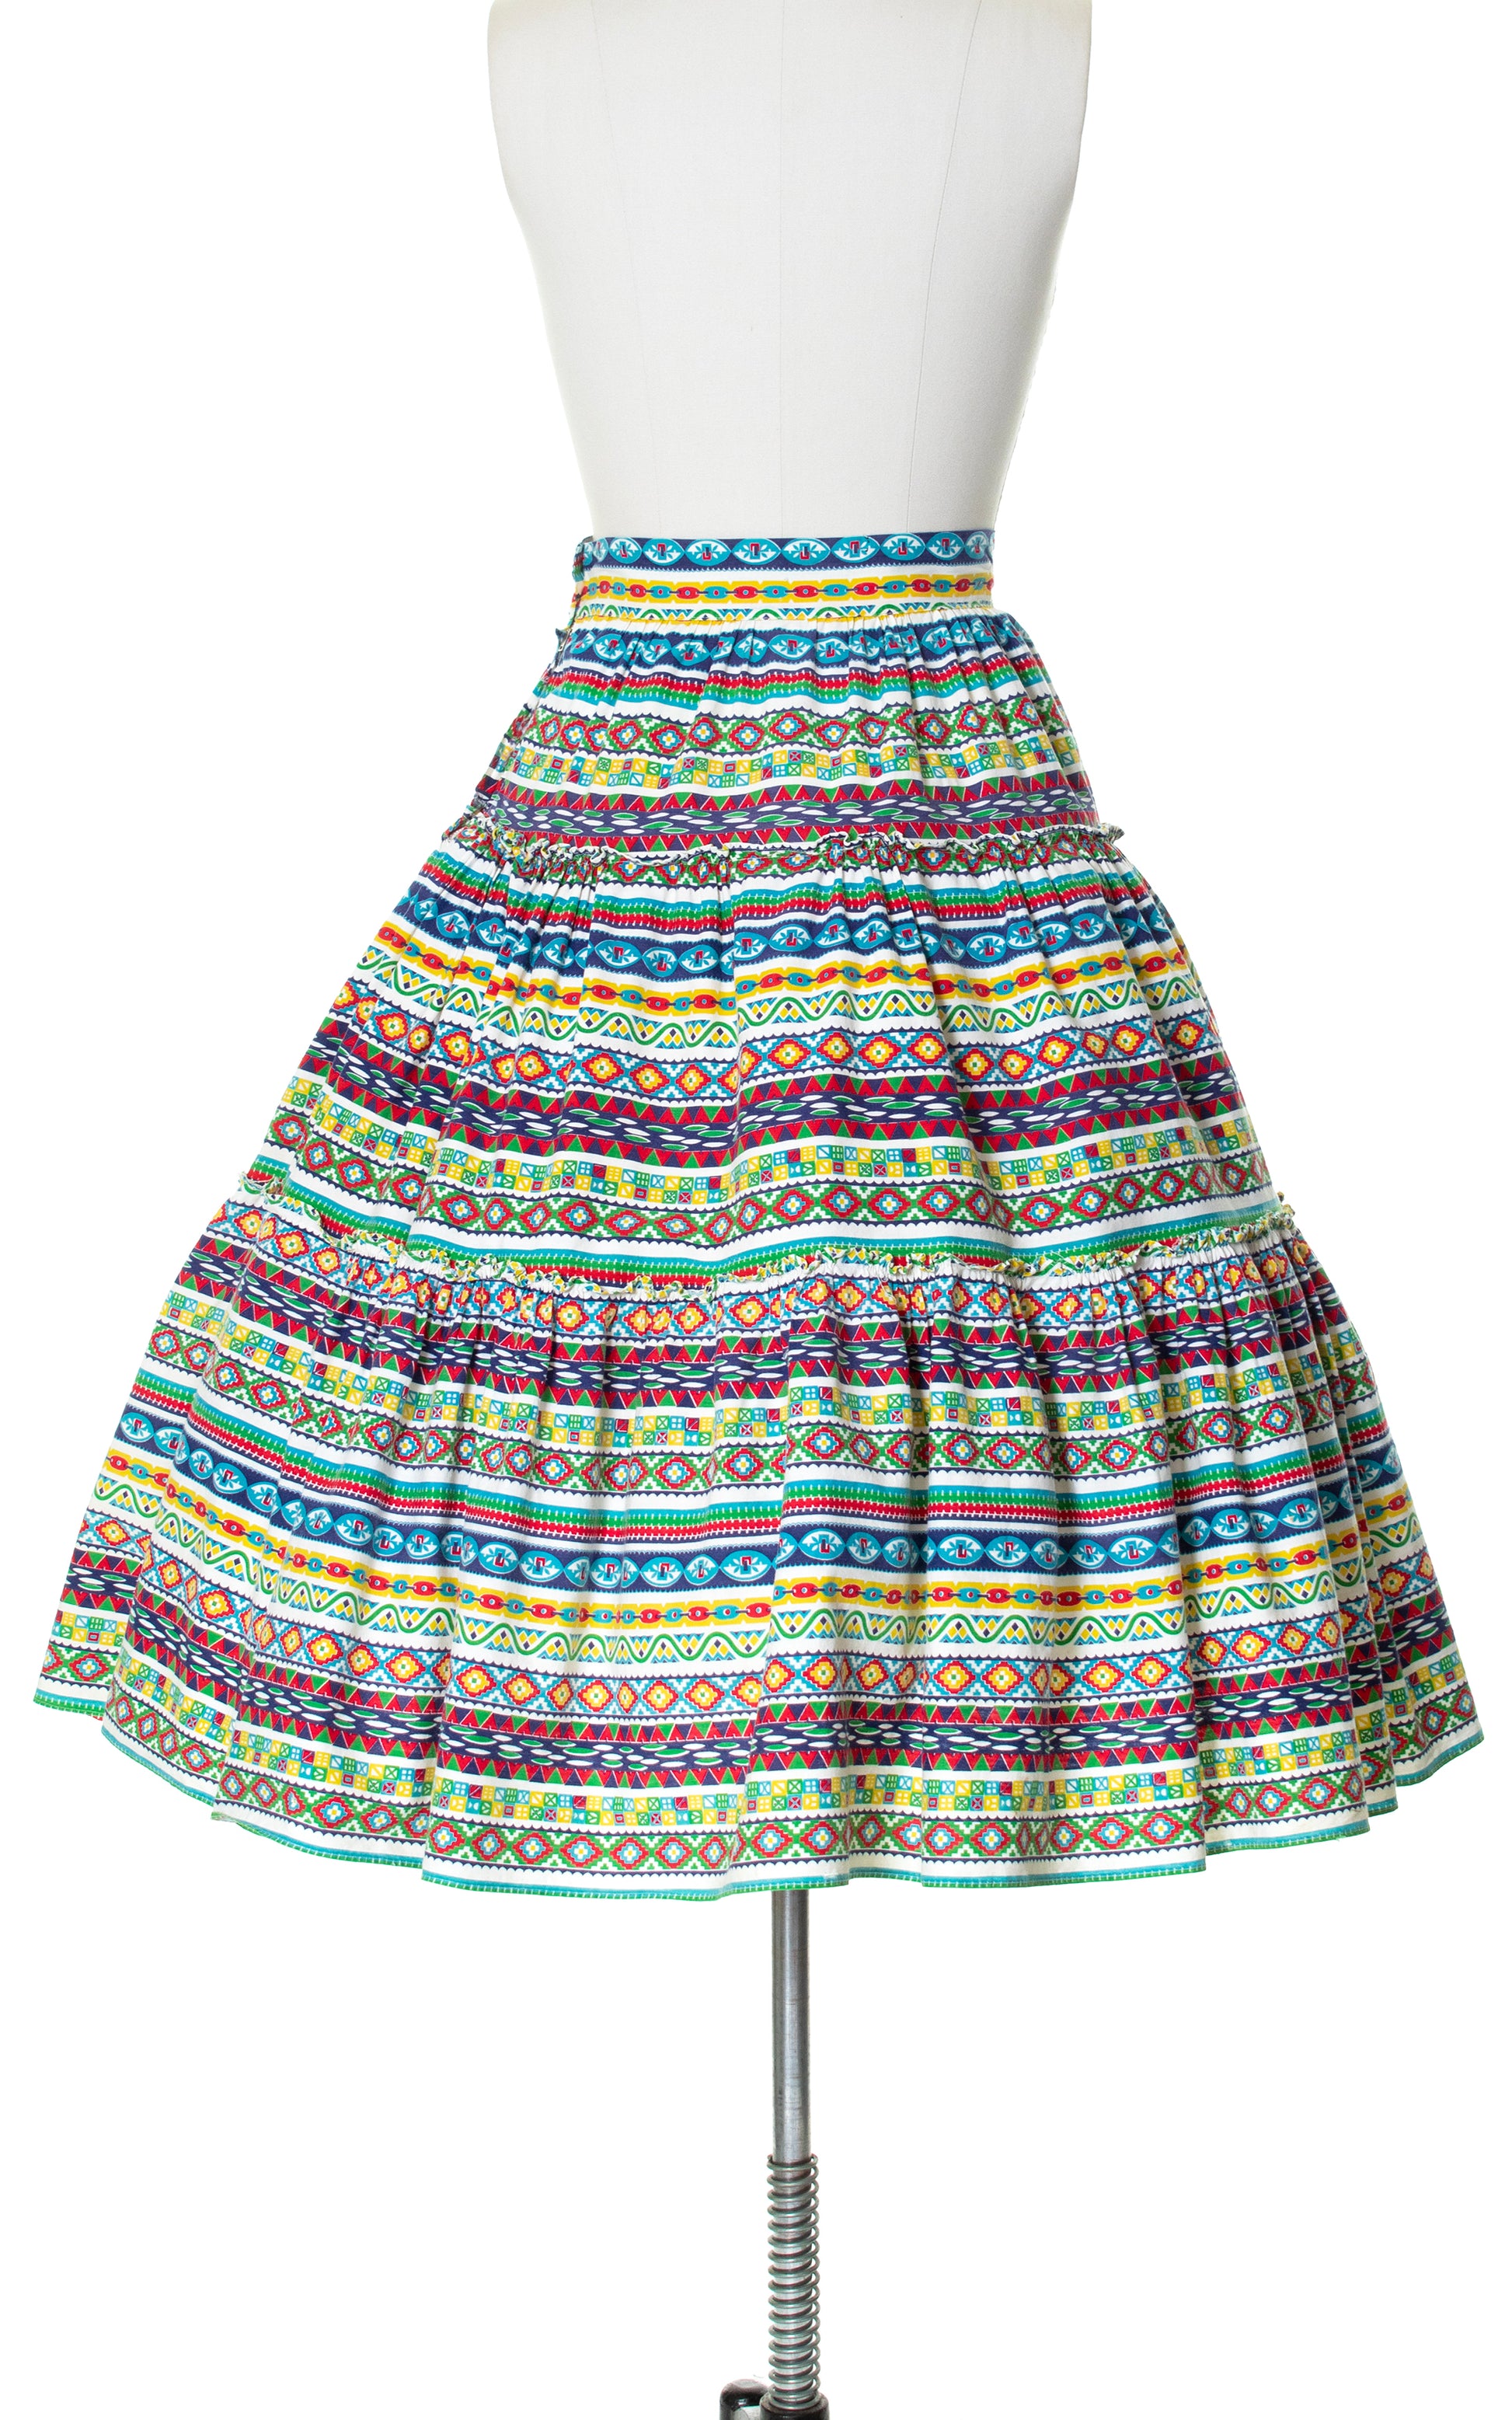 Vintage 50s 1950s Southwestern Geometric Striped Tiered Cotton Full High Waisted Skirt BirthdayLifeVintage